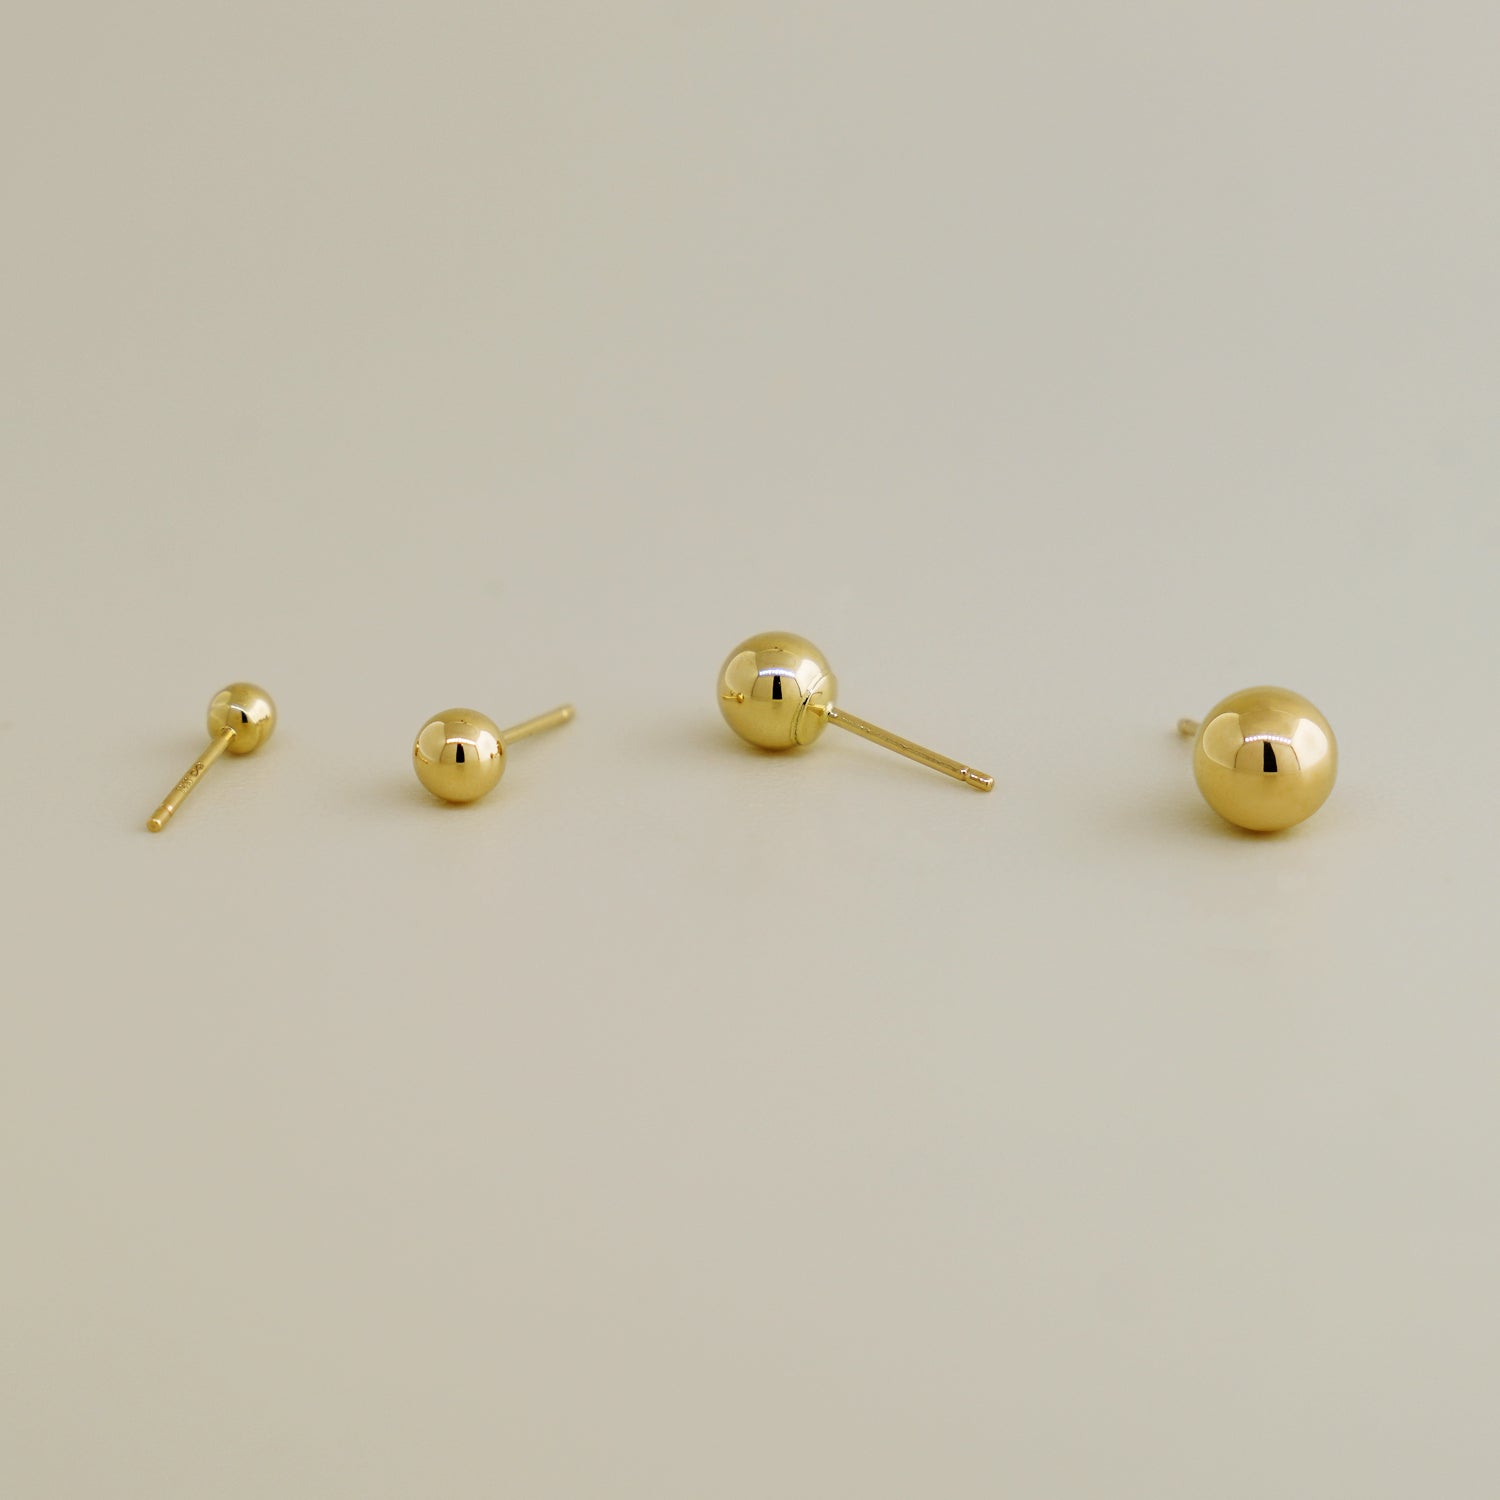 14K Solid Gold Sphere Round Ball Stud Earrings - Anygolds 